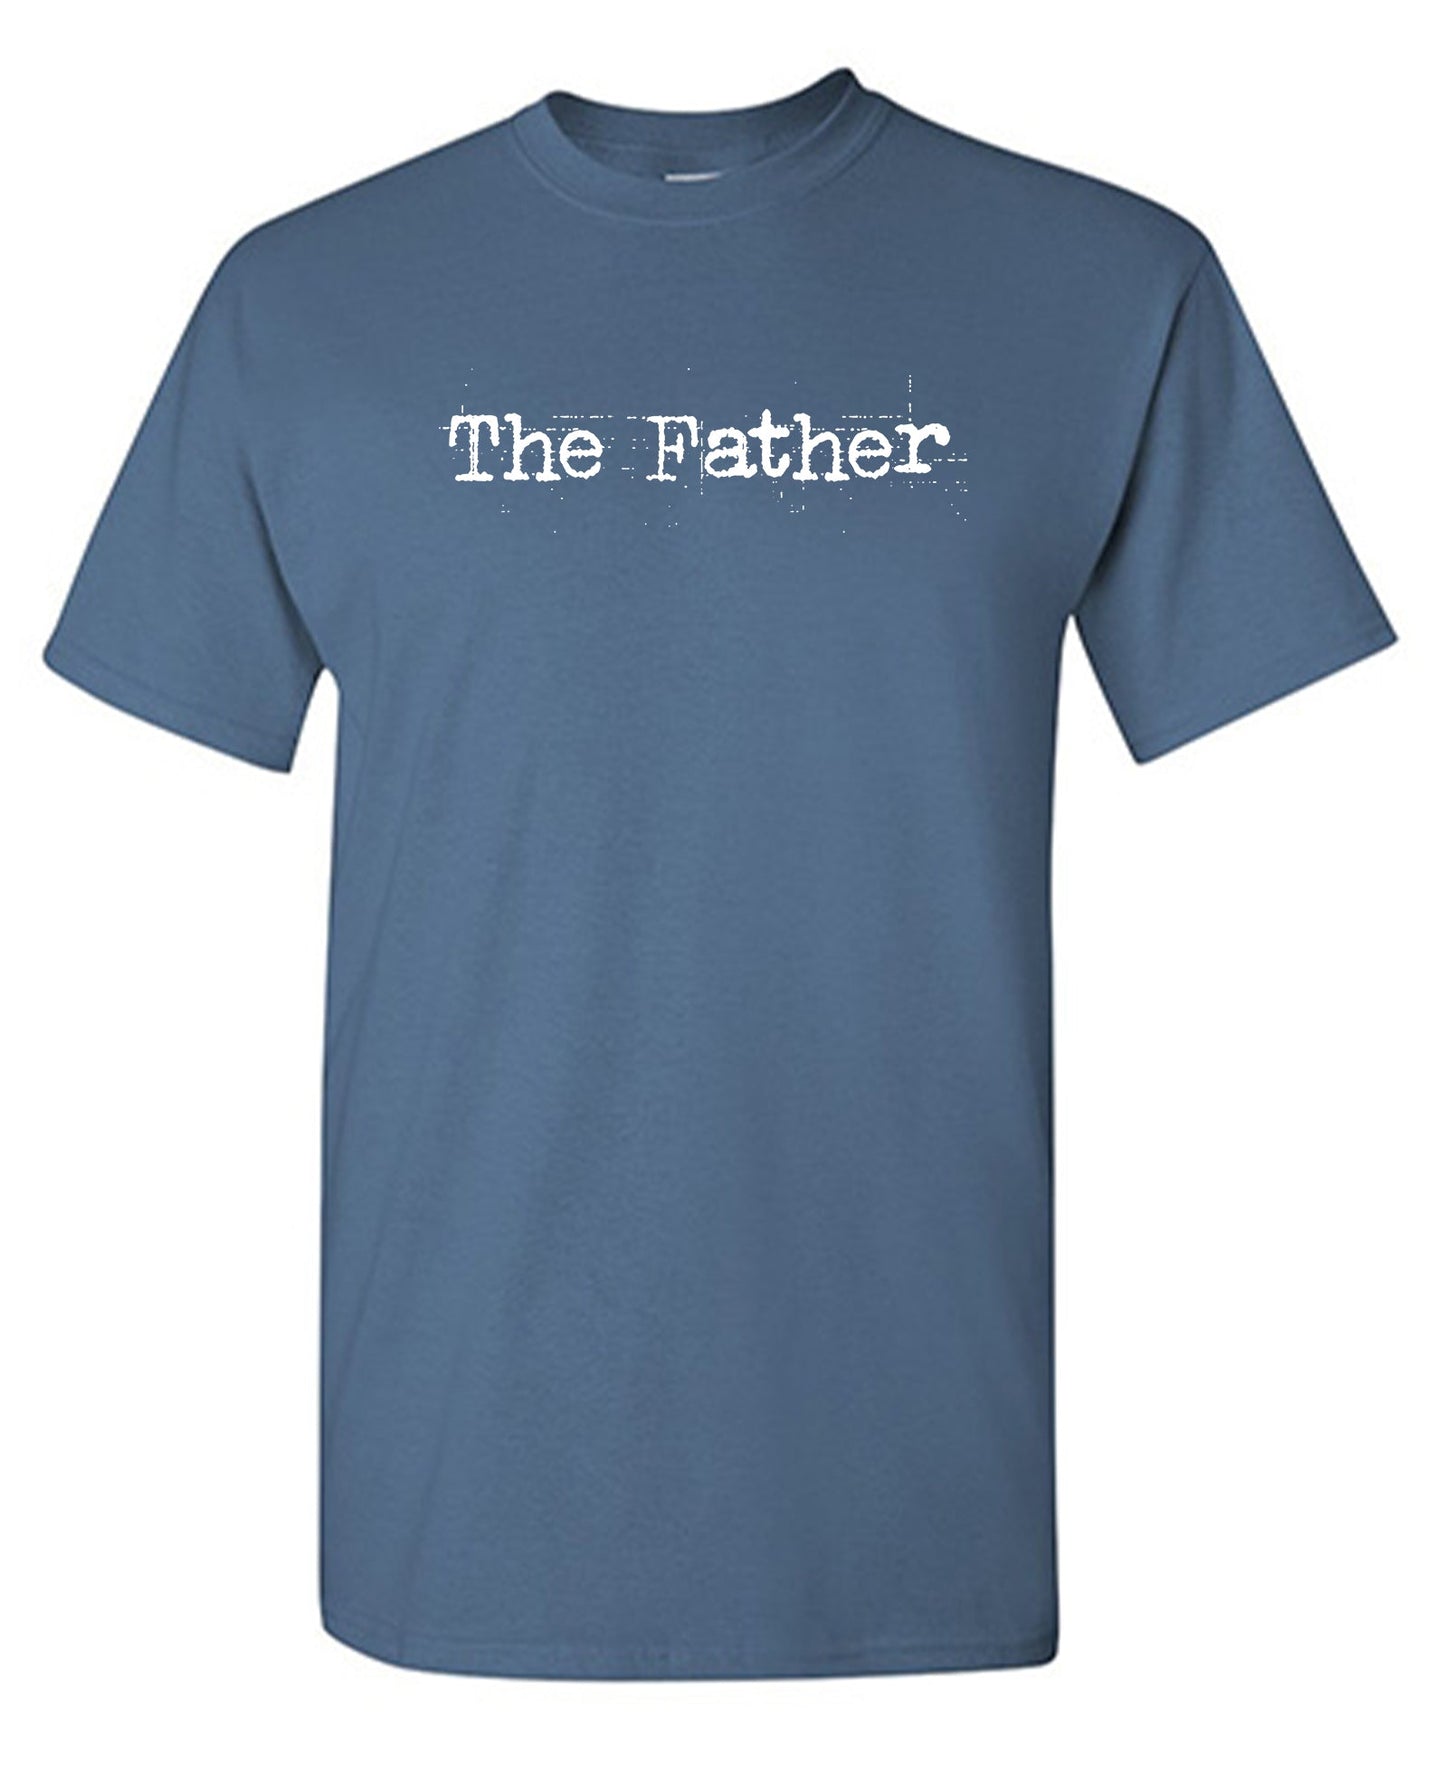 The FATHER, New - Funny T Shirts & Graphic Tees